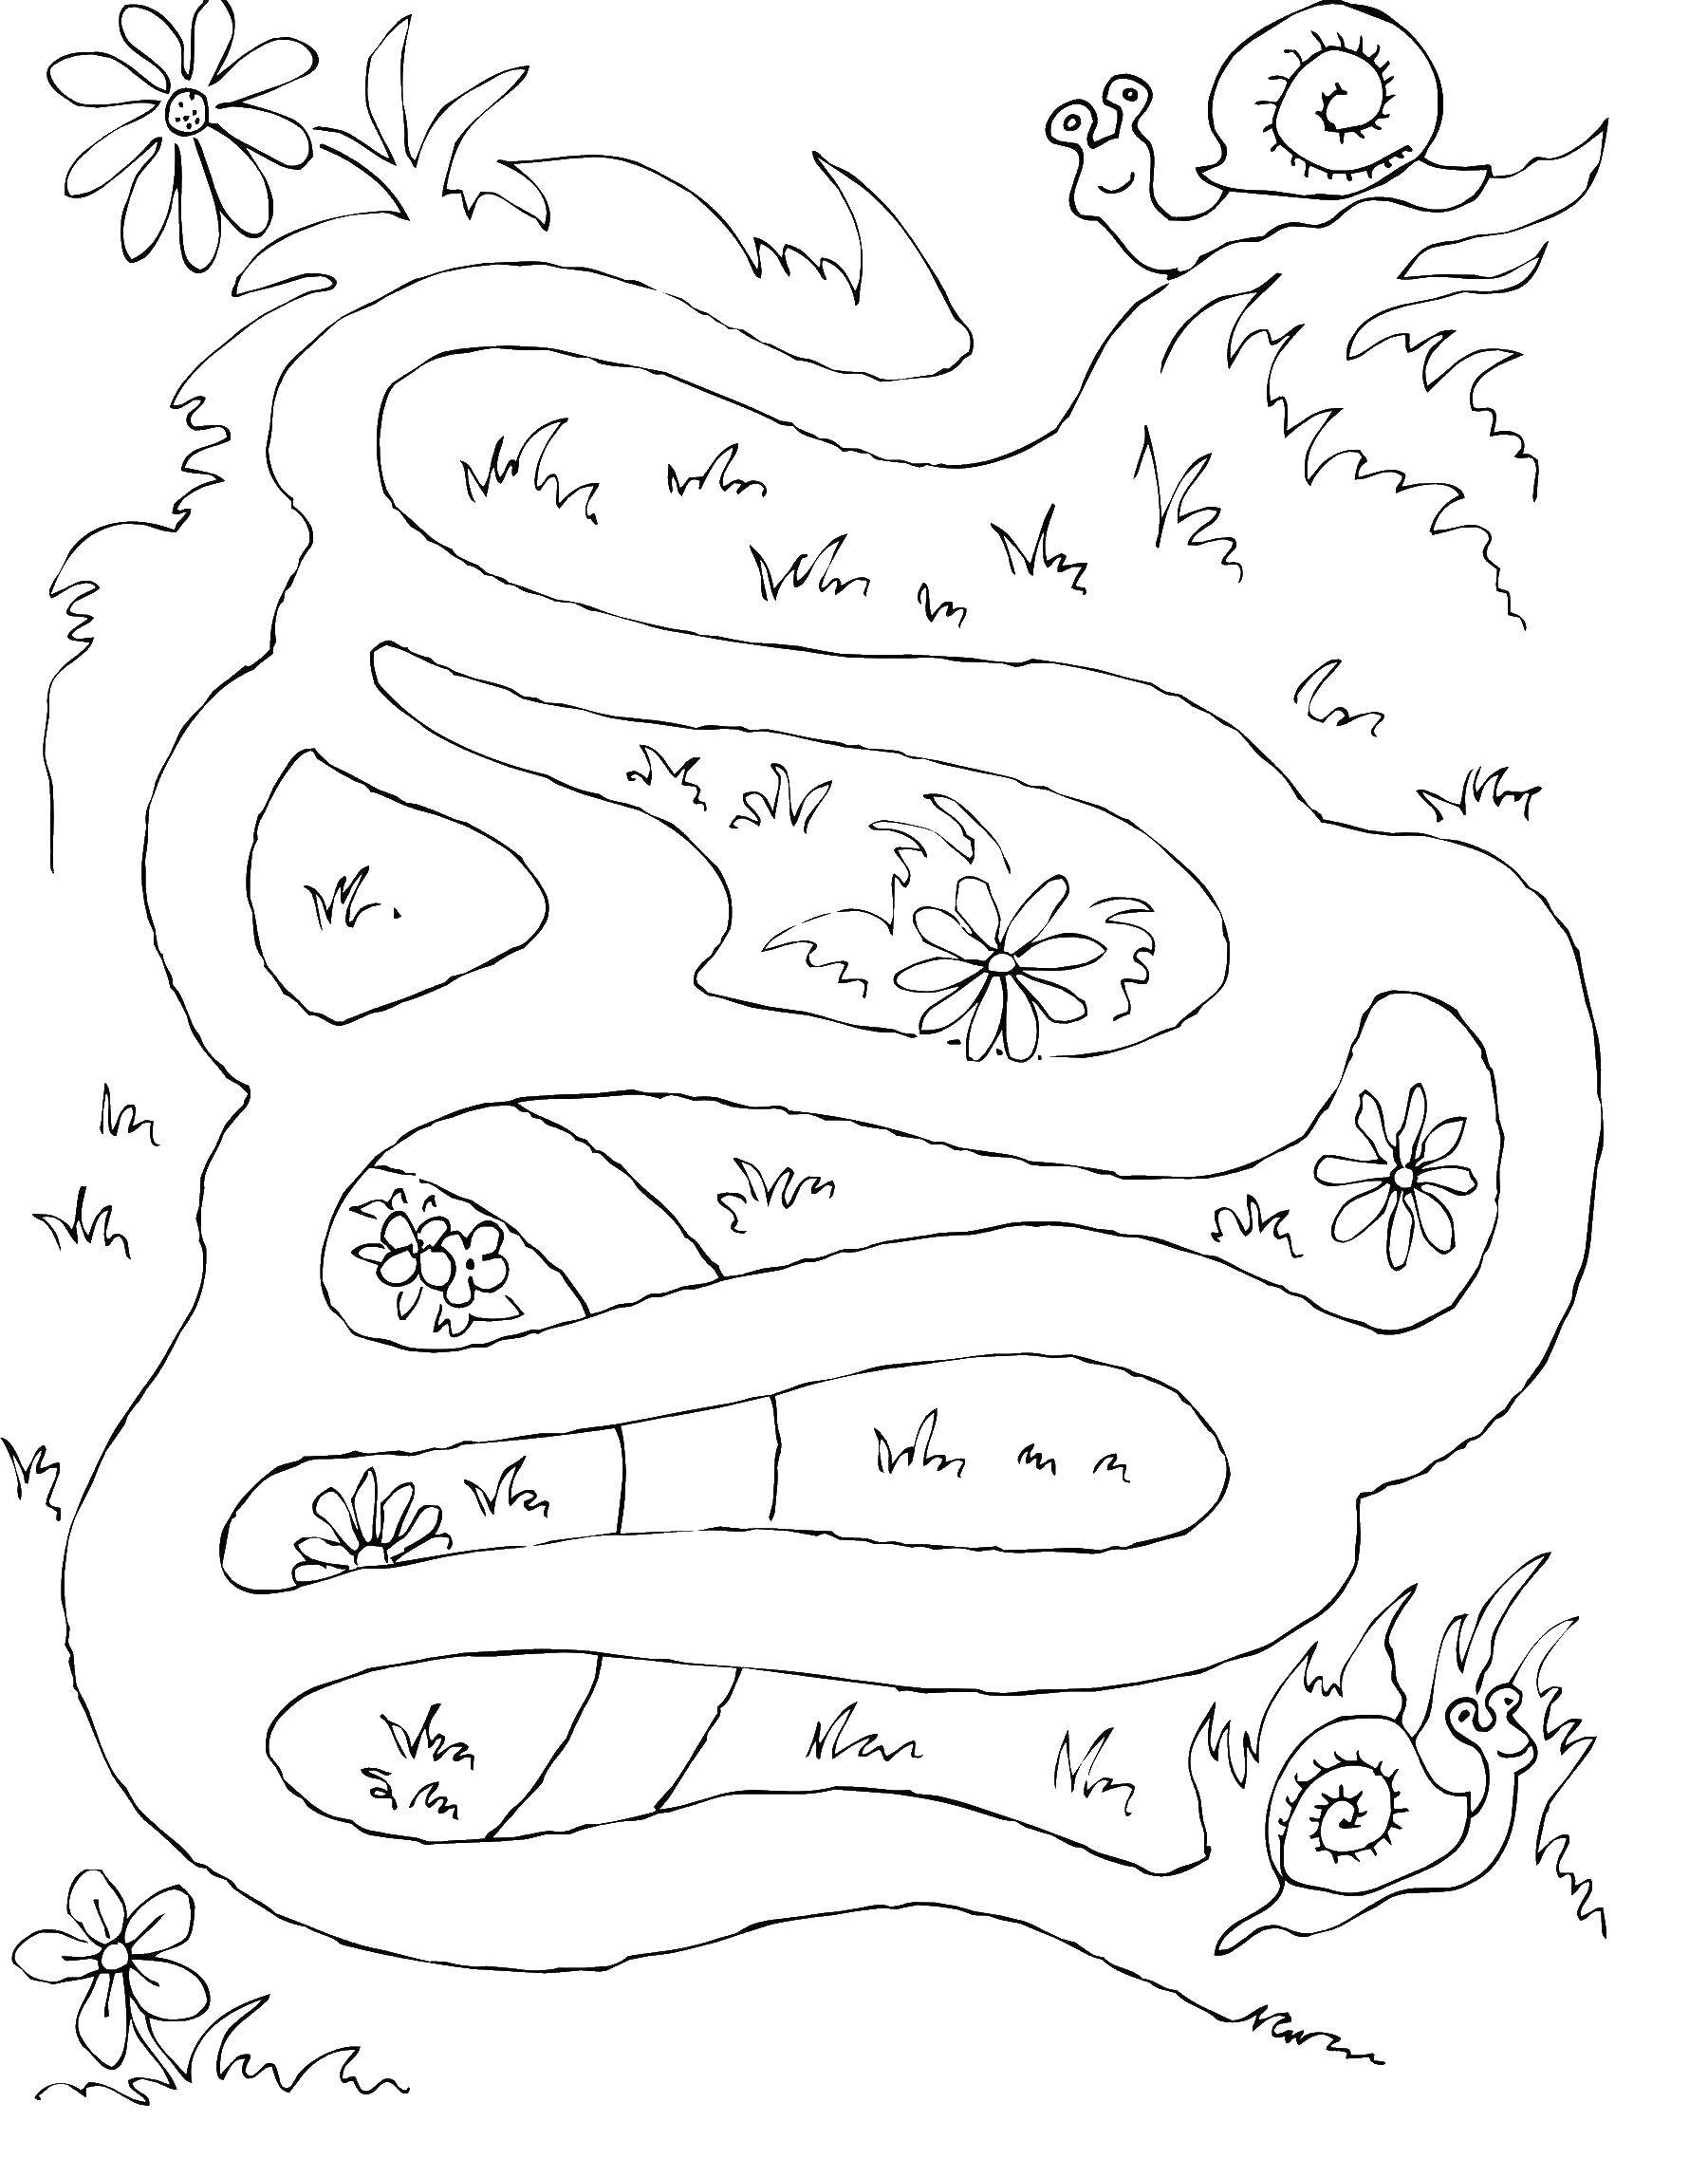 Coloring Help the little snails. Category Mazes. Tags:  Maze, logic.